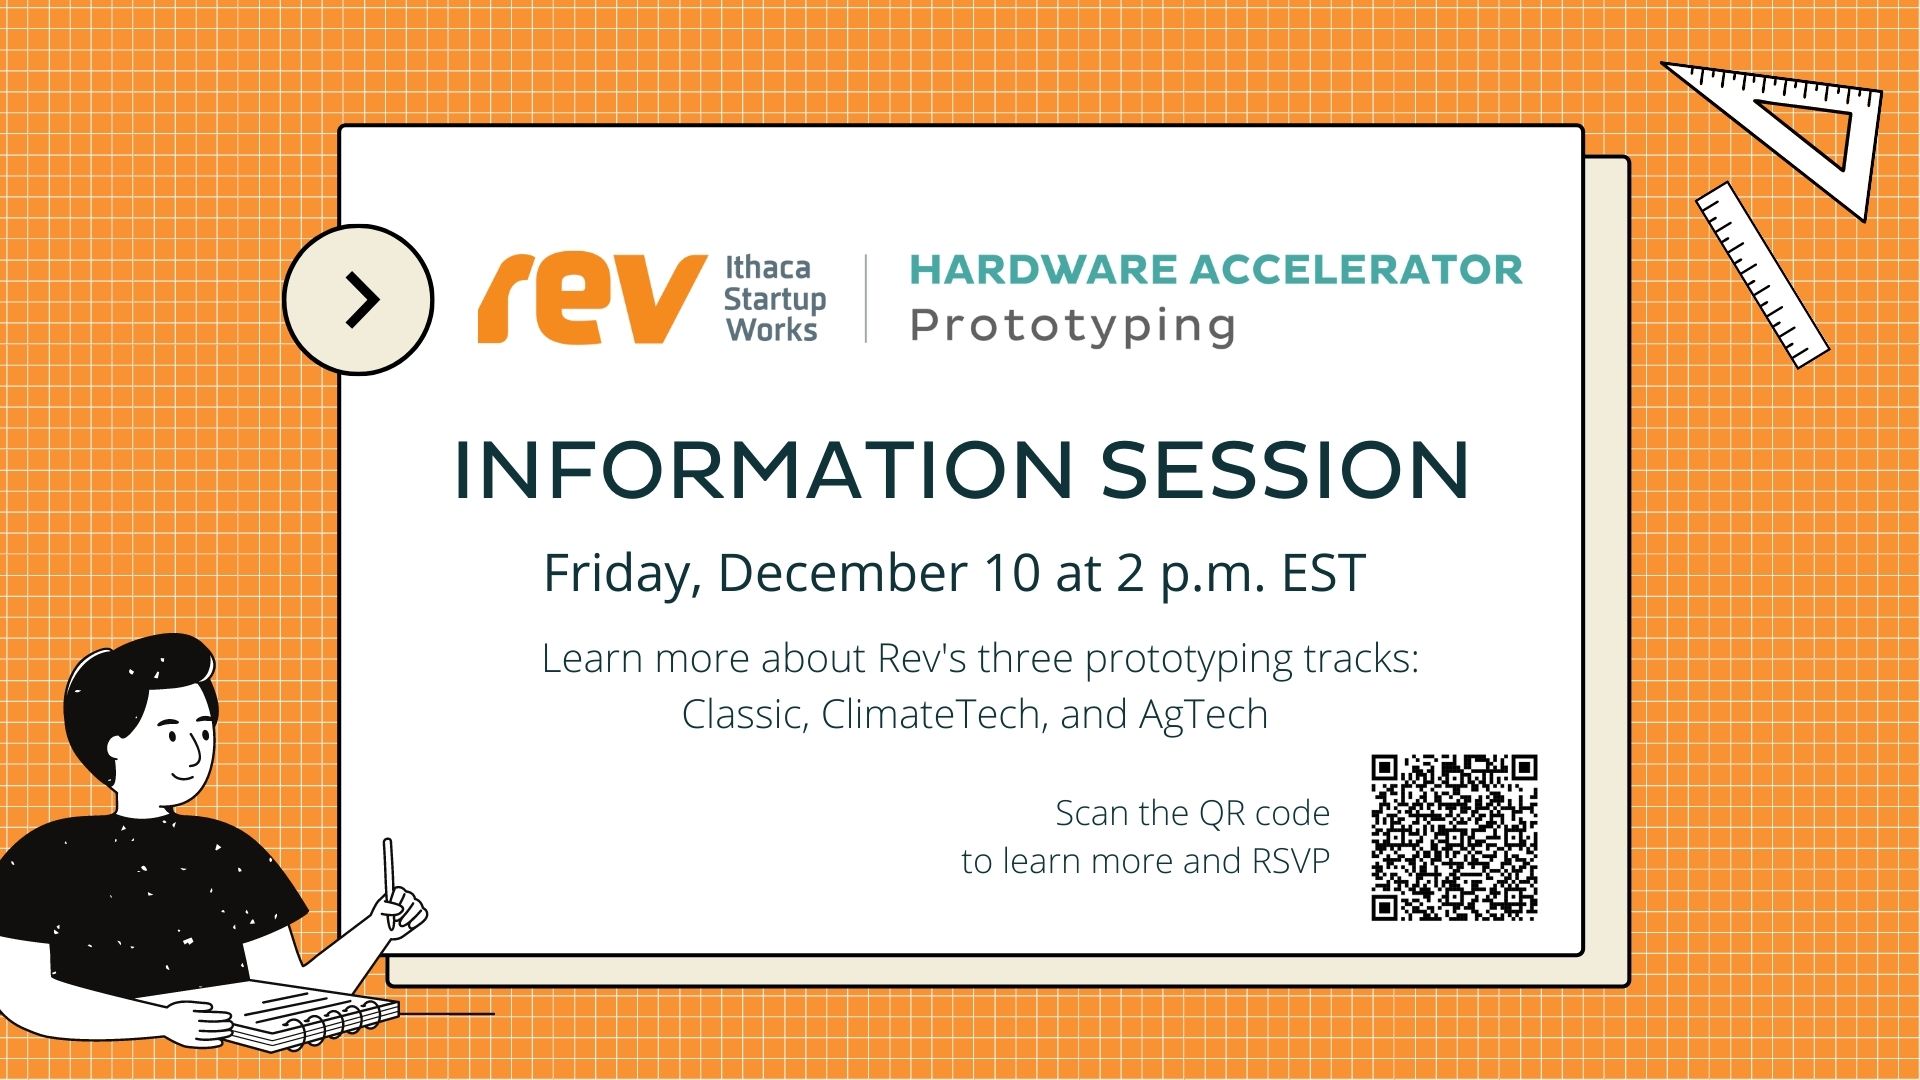 Information Session Friday, December 10 at 2 p.m. EST Learn more about Rev's three prototyping tracks: Classic, ClimateTech and AgTech